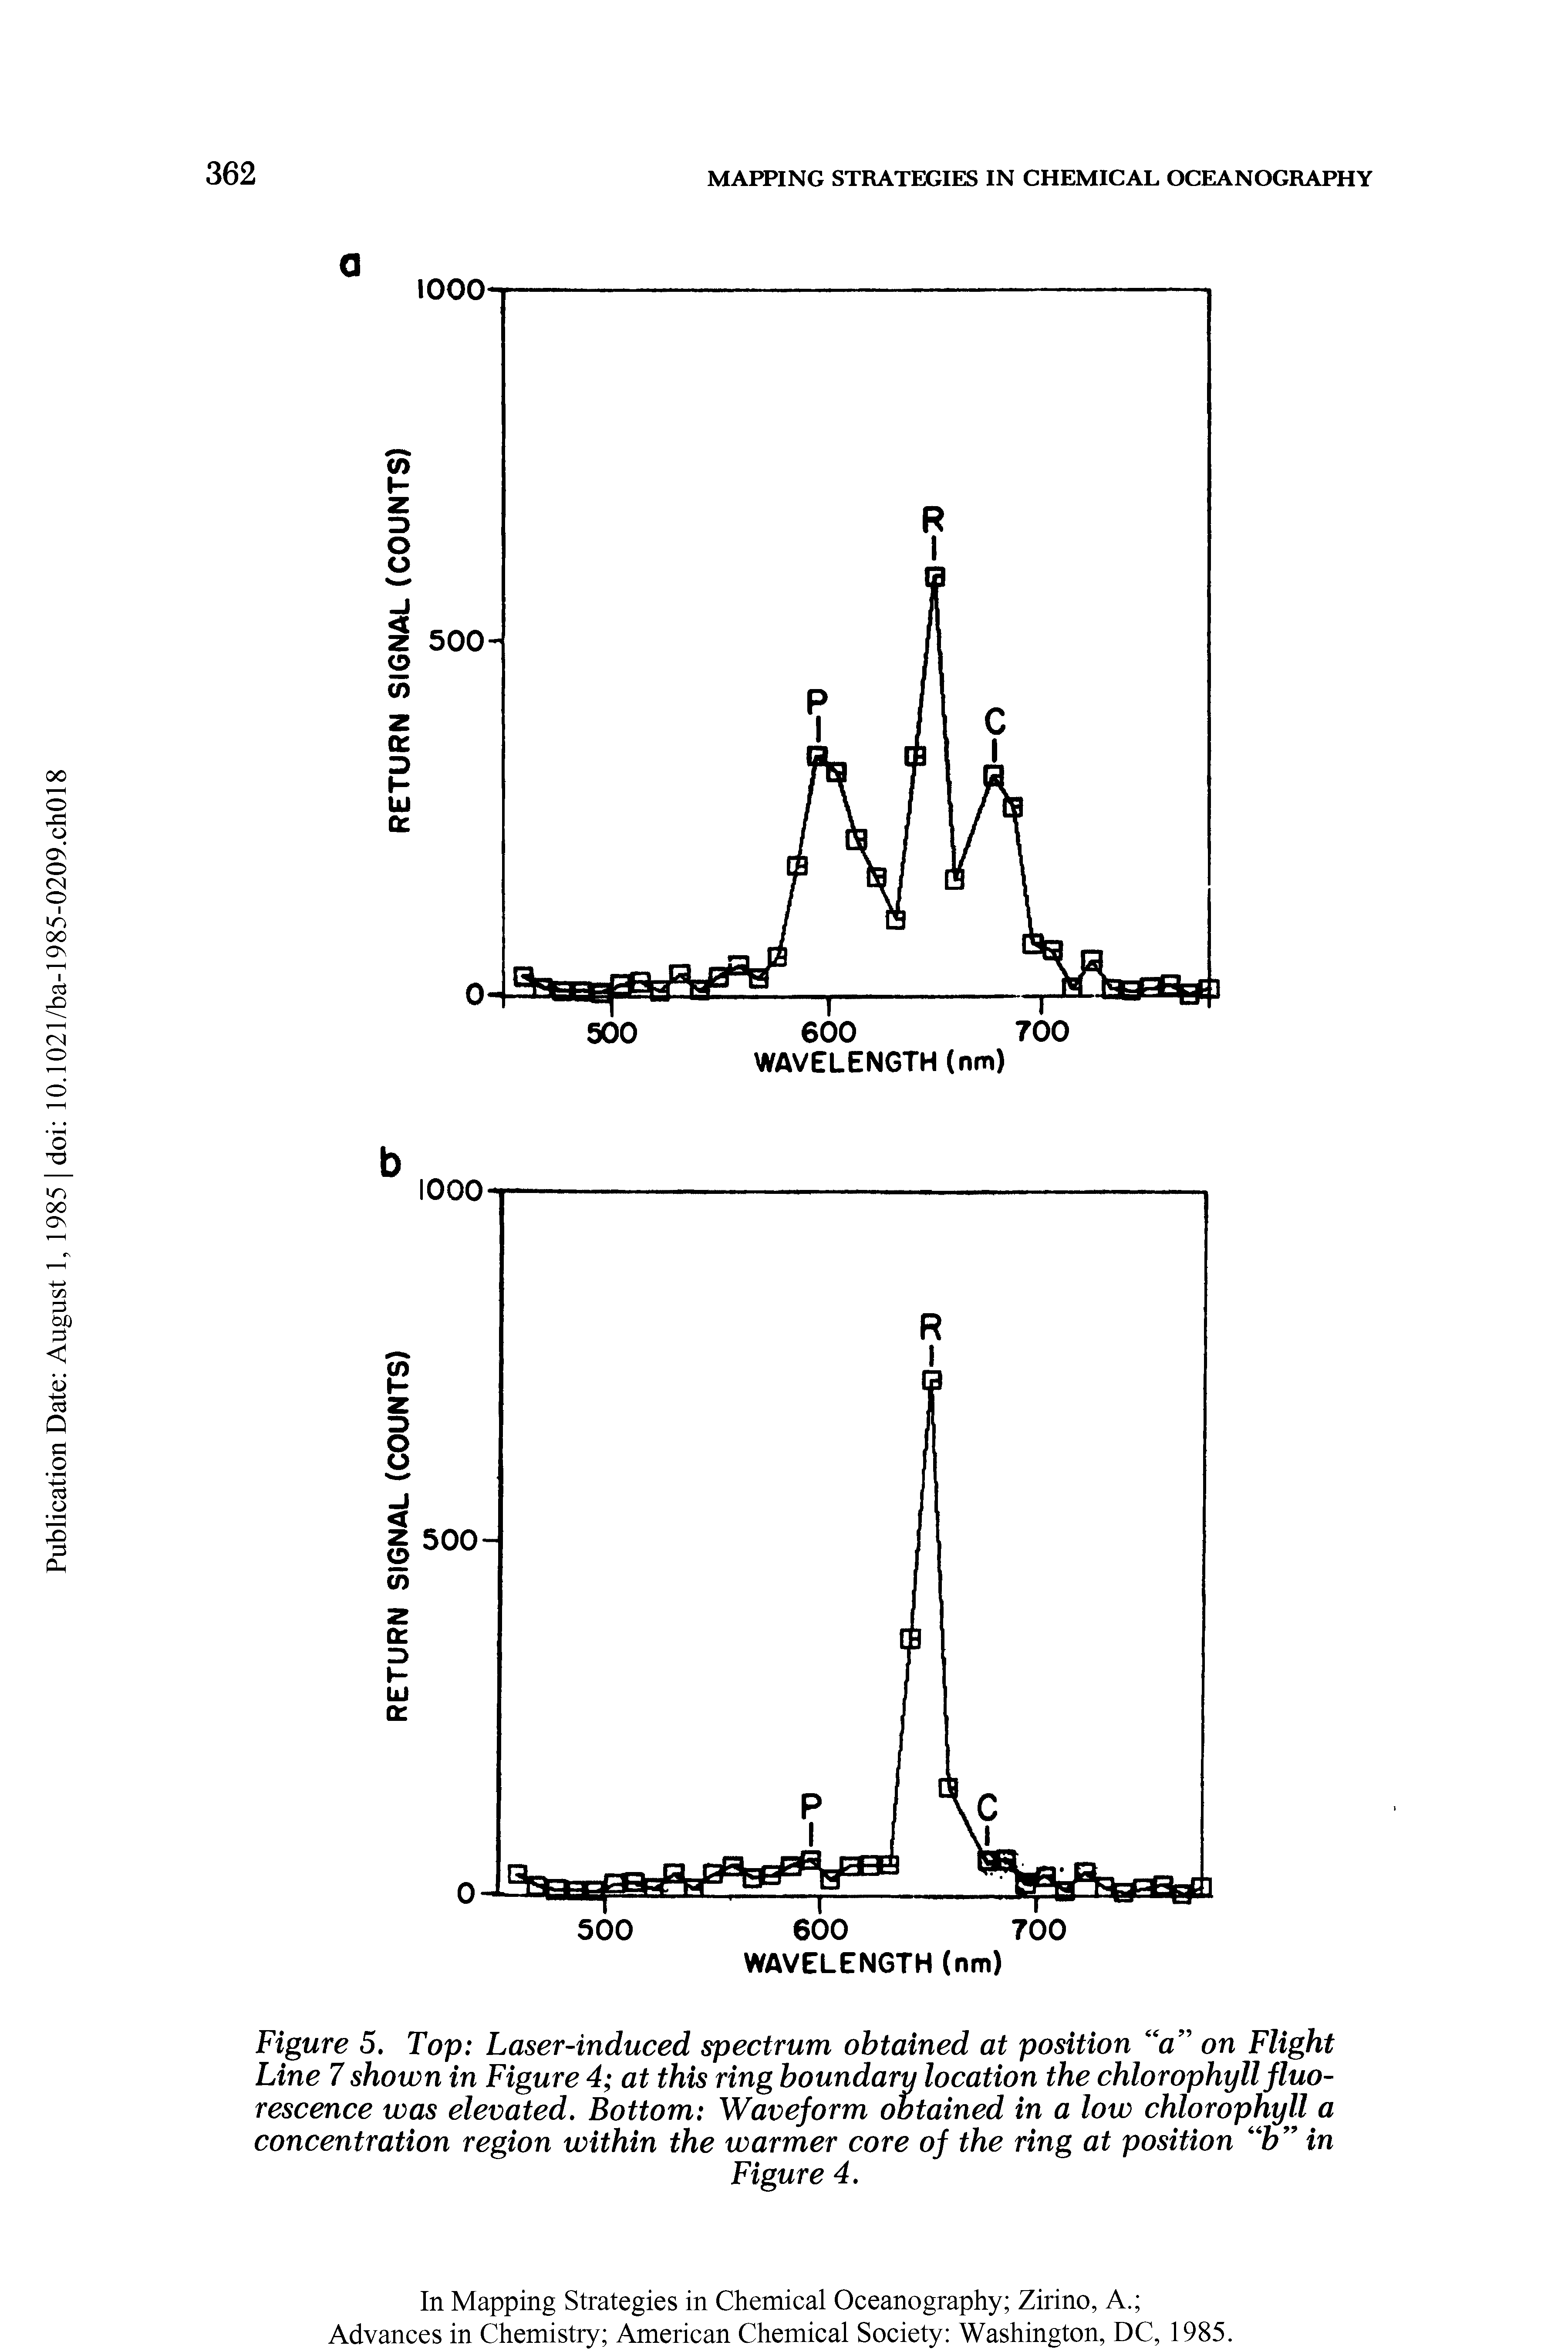 Figure 5. Top Laser-induced spectrum obtained at position a on Flight Line 7 shown in Figure 4 at this ring boundary location the chlorophyll fluorescence was elevated. Bottom Waveform obtained in a low chlorophyll a concentration region within the warmer core of the ring at position Z in...